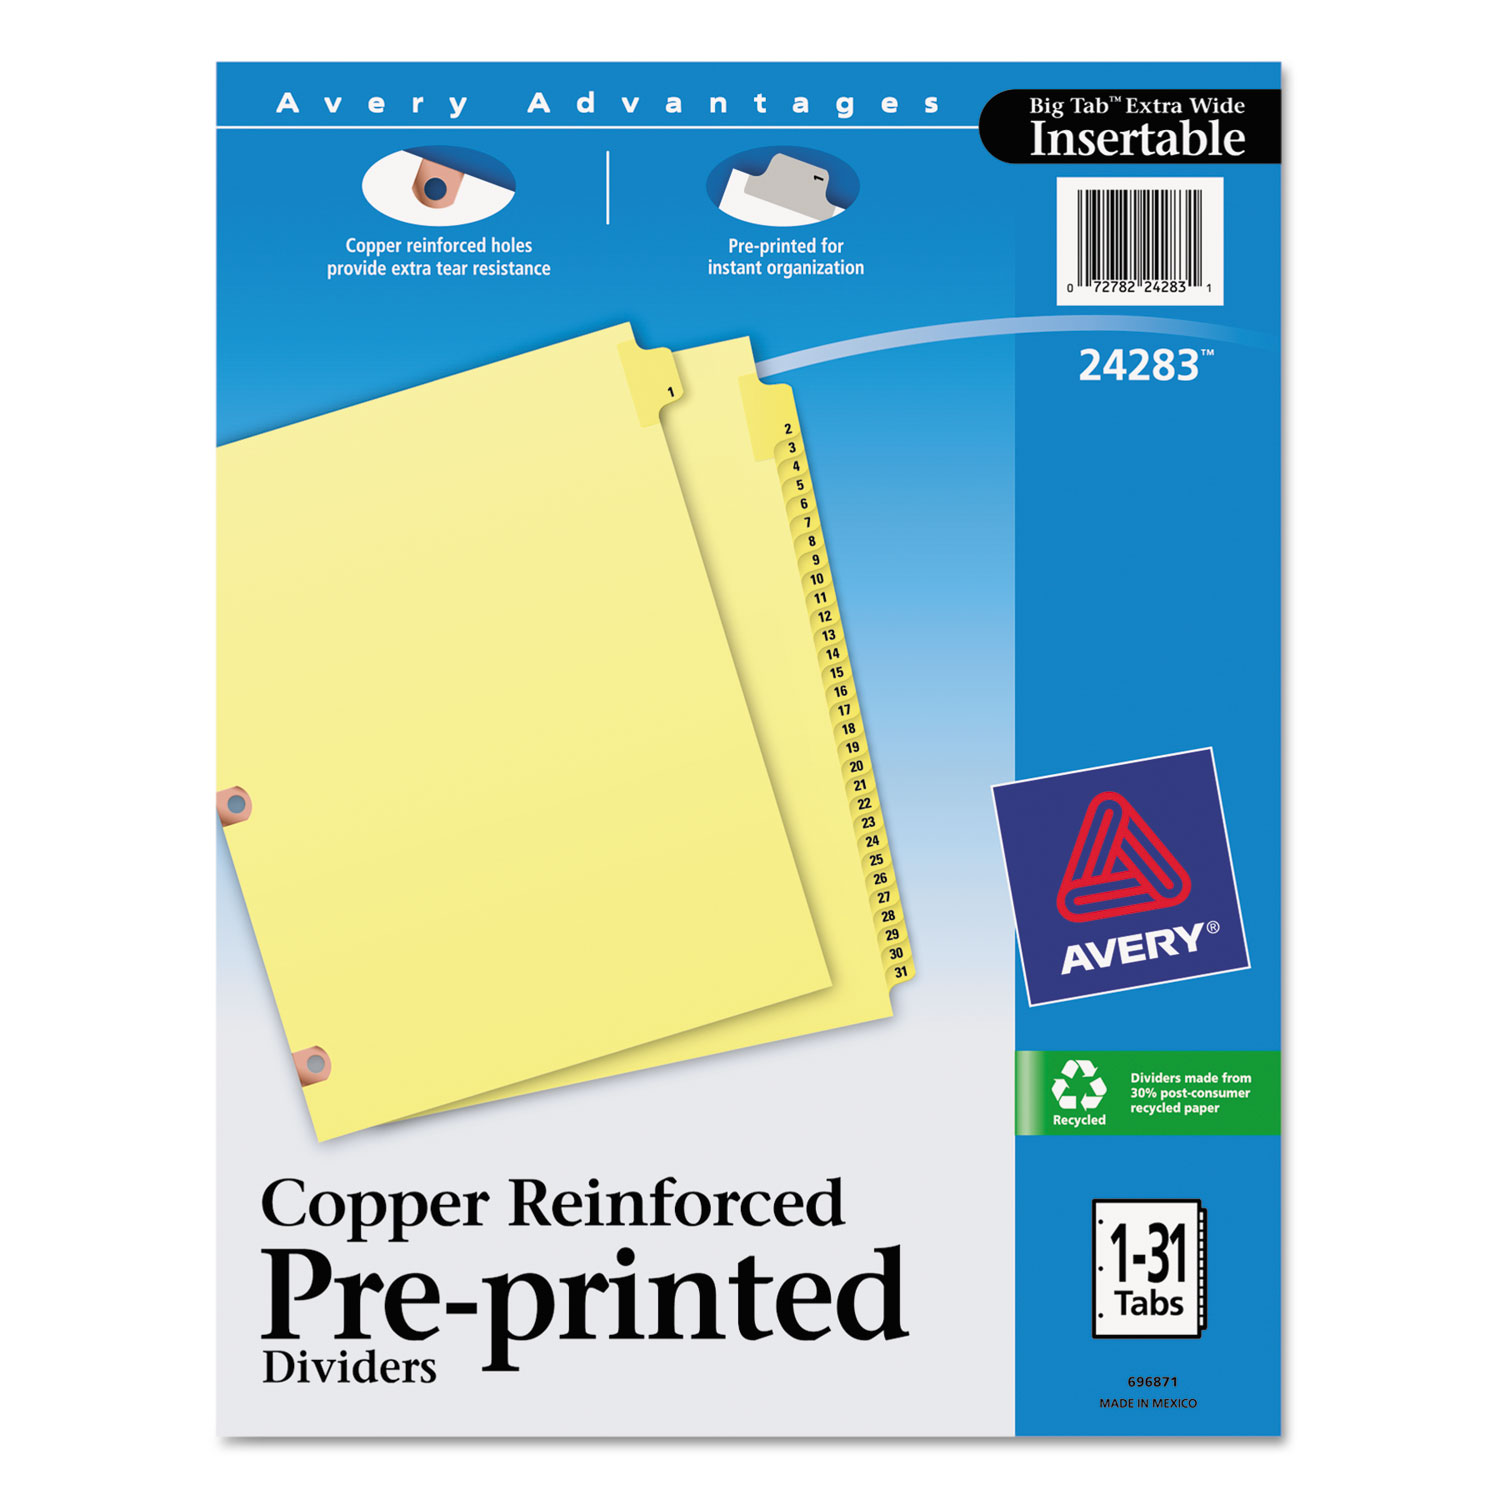  Avery 24283 Preprinted Laminated Tab Dividers w/Copper Reinforced Holes, 31-Tab, Letter (AVE24283) 